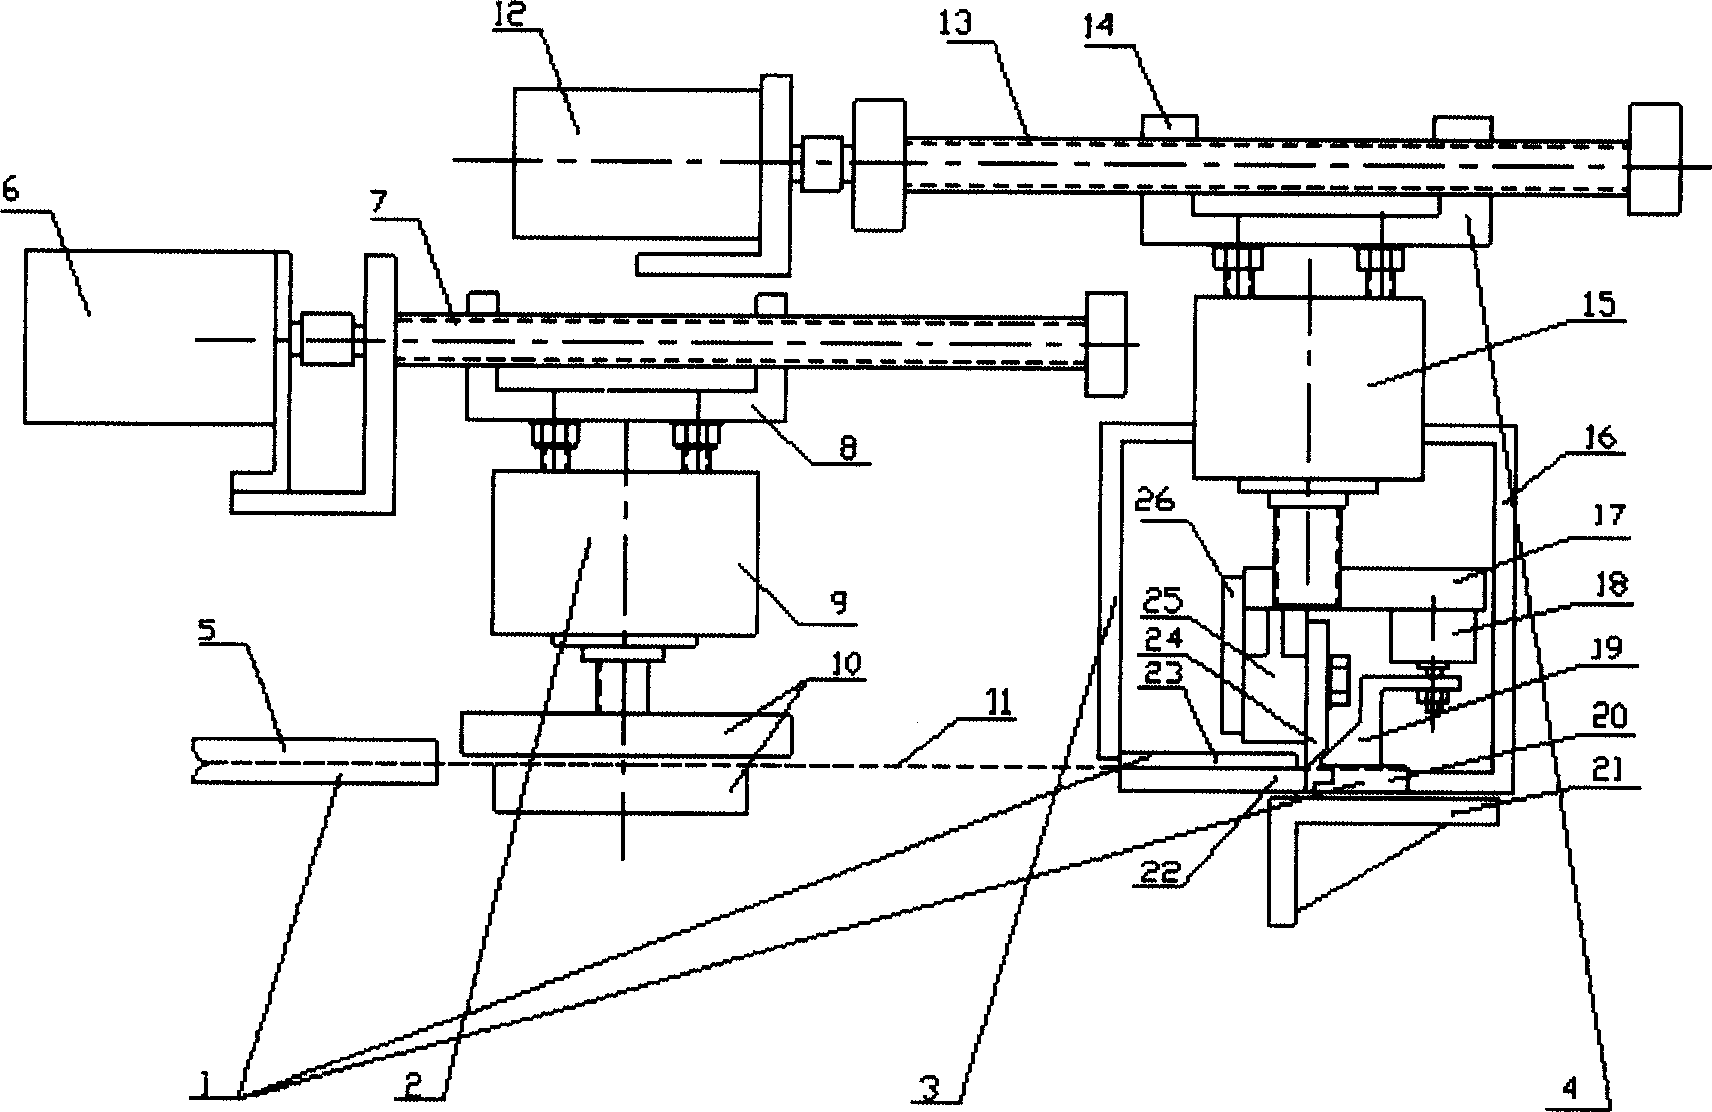 Continuous shearing and pressing device for rigid thin band